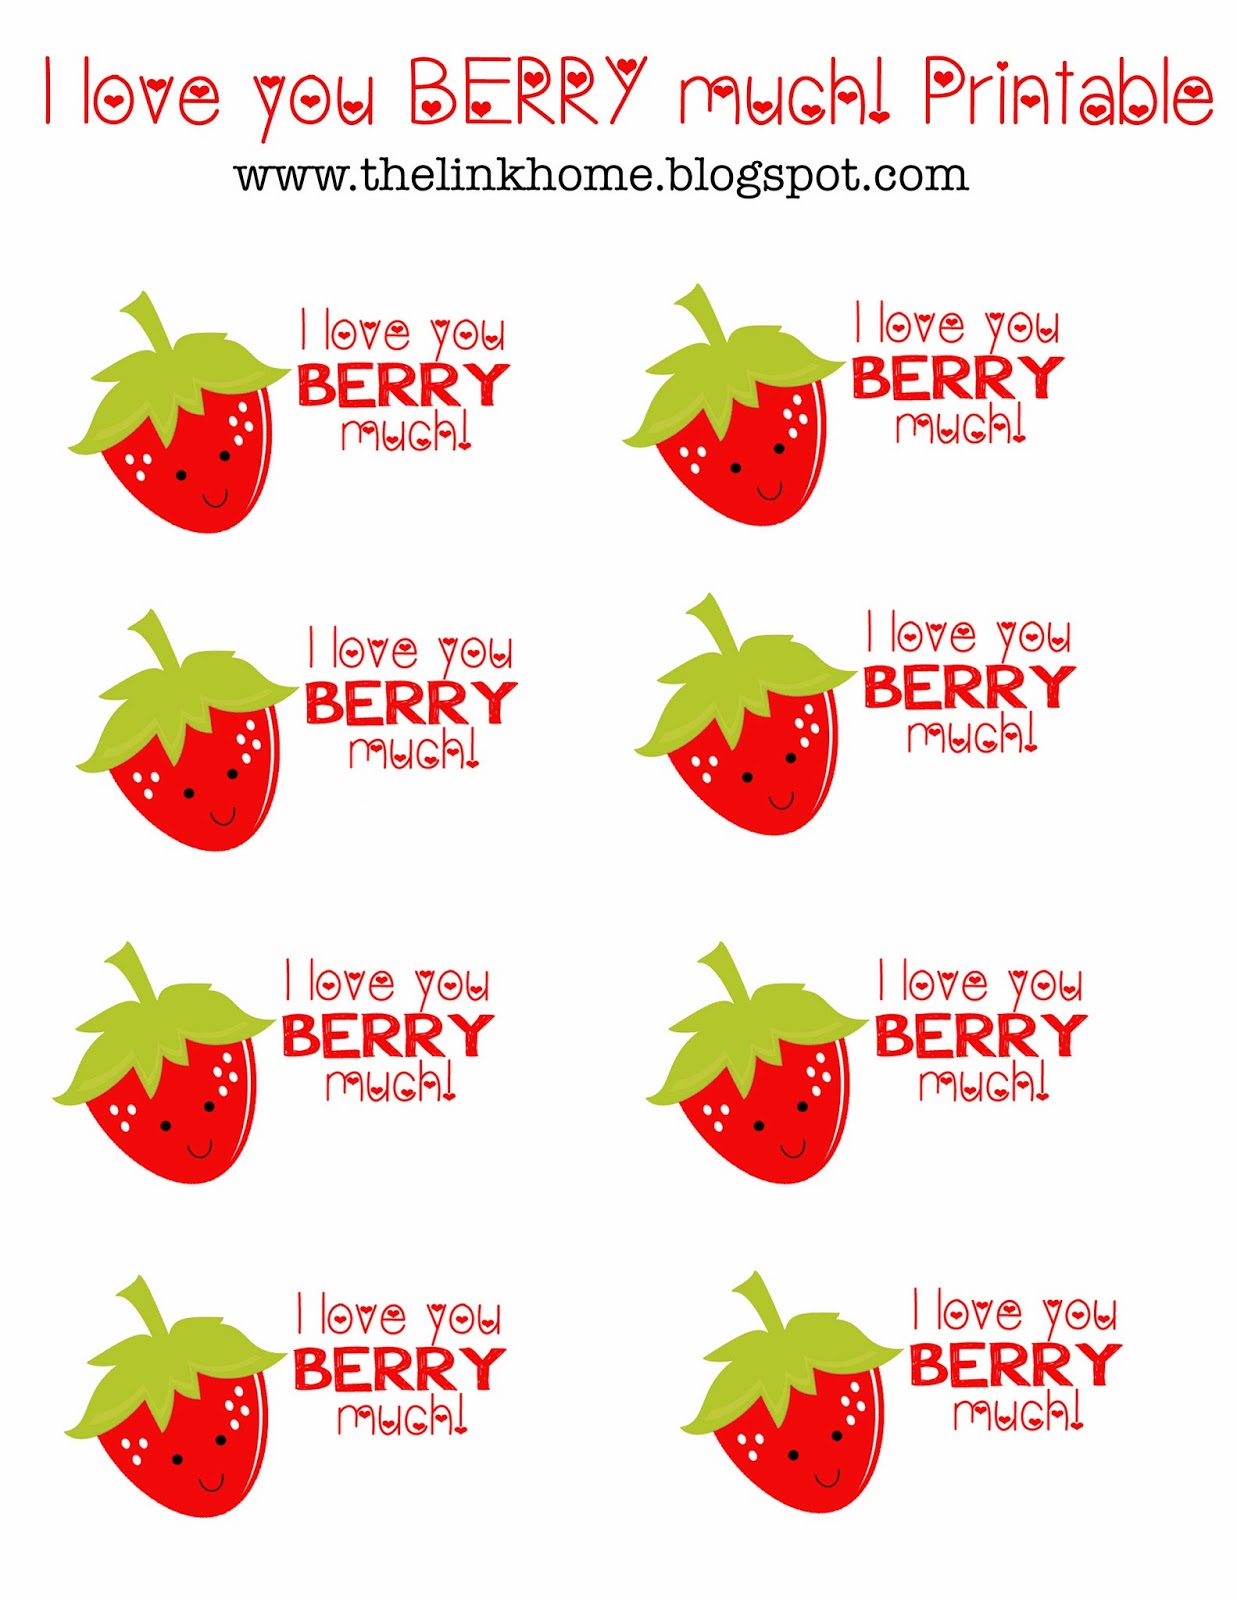 the-link-home-i-love-you-berry-much-a-free-printable